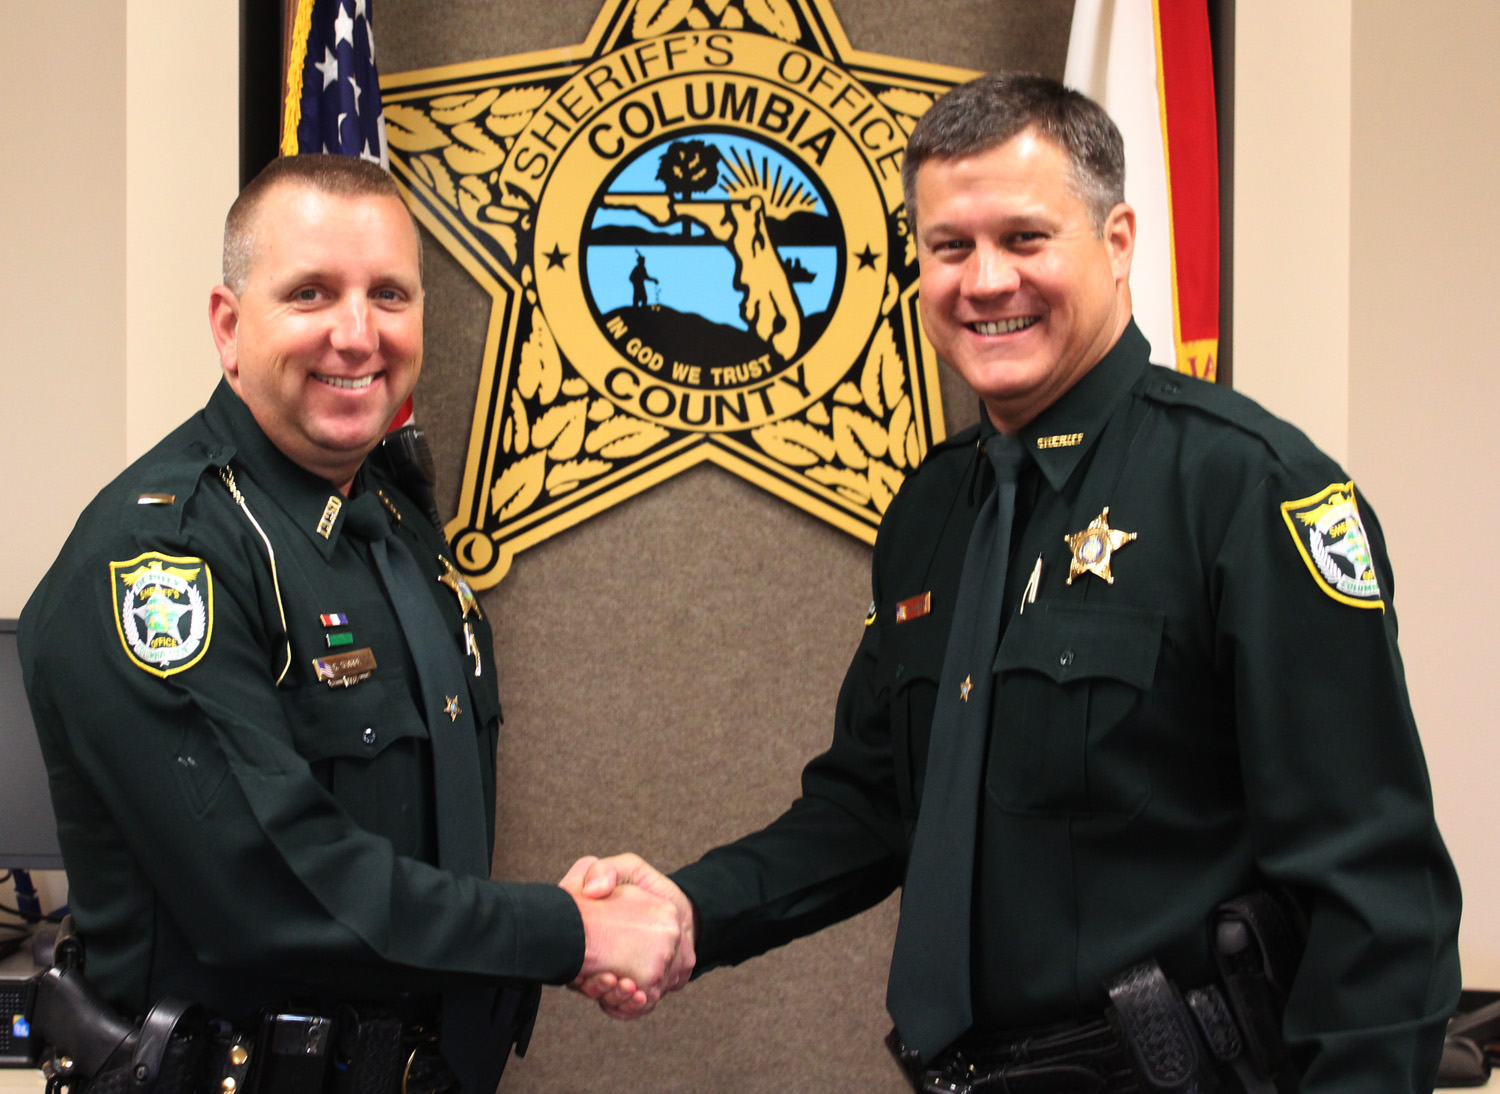 Promotion Ceremony Held At Ccso Columbia County Fl Sheriffs Office